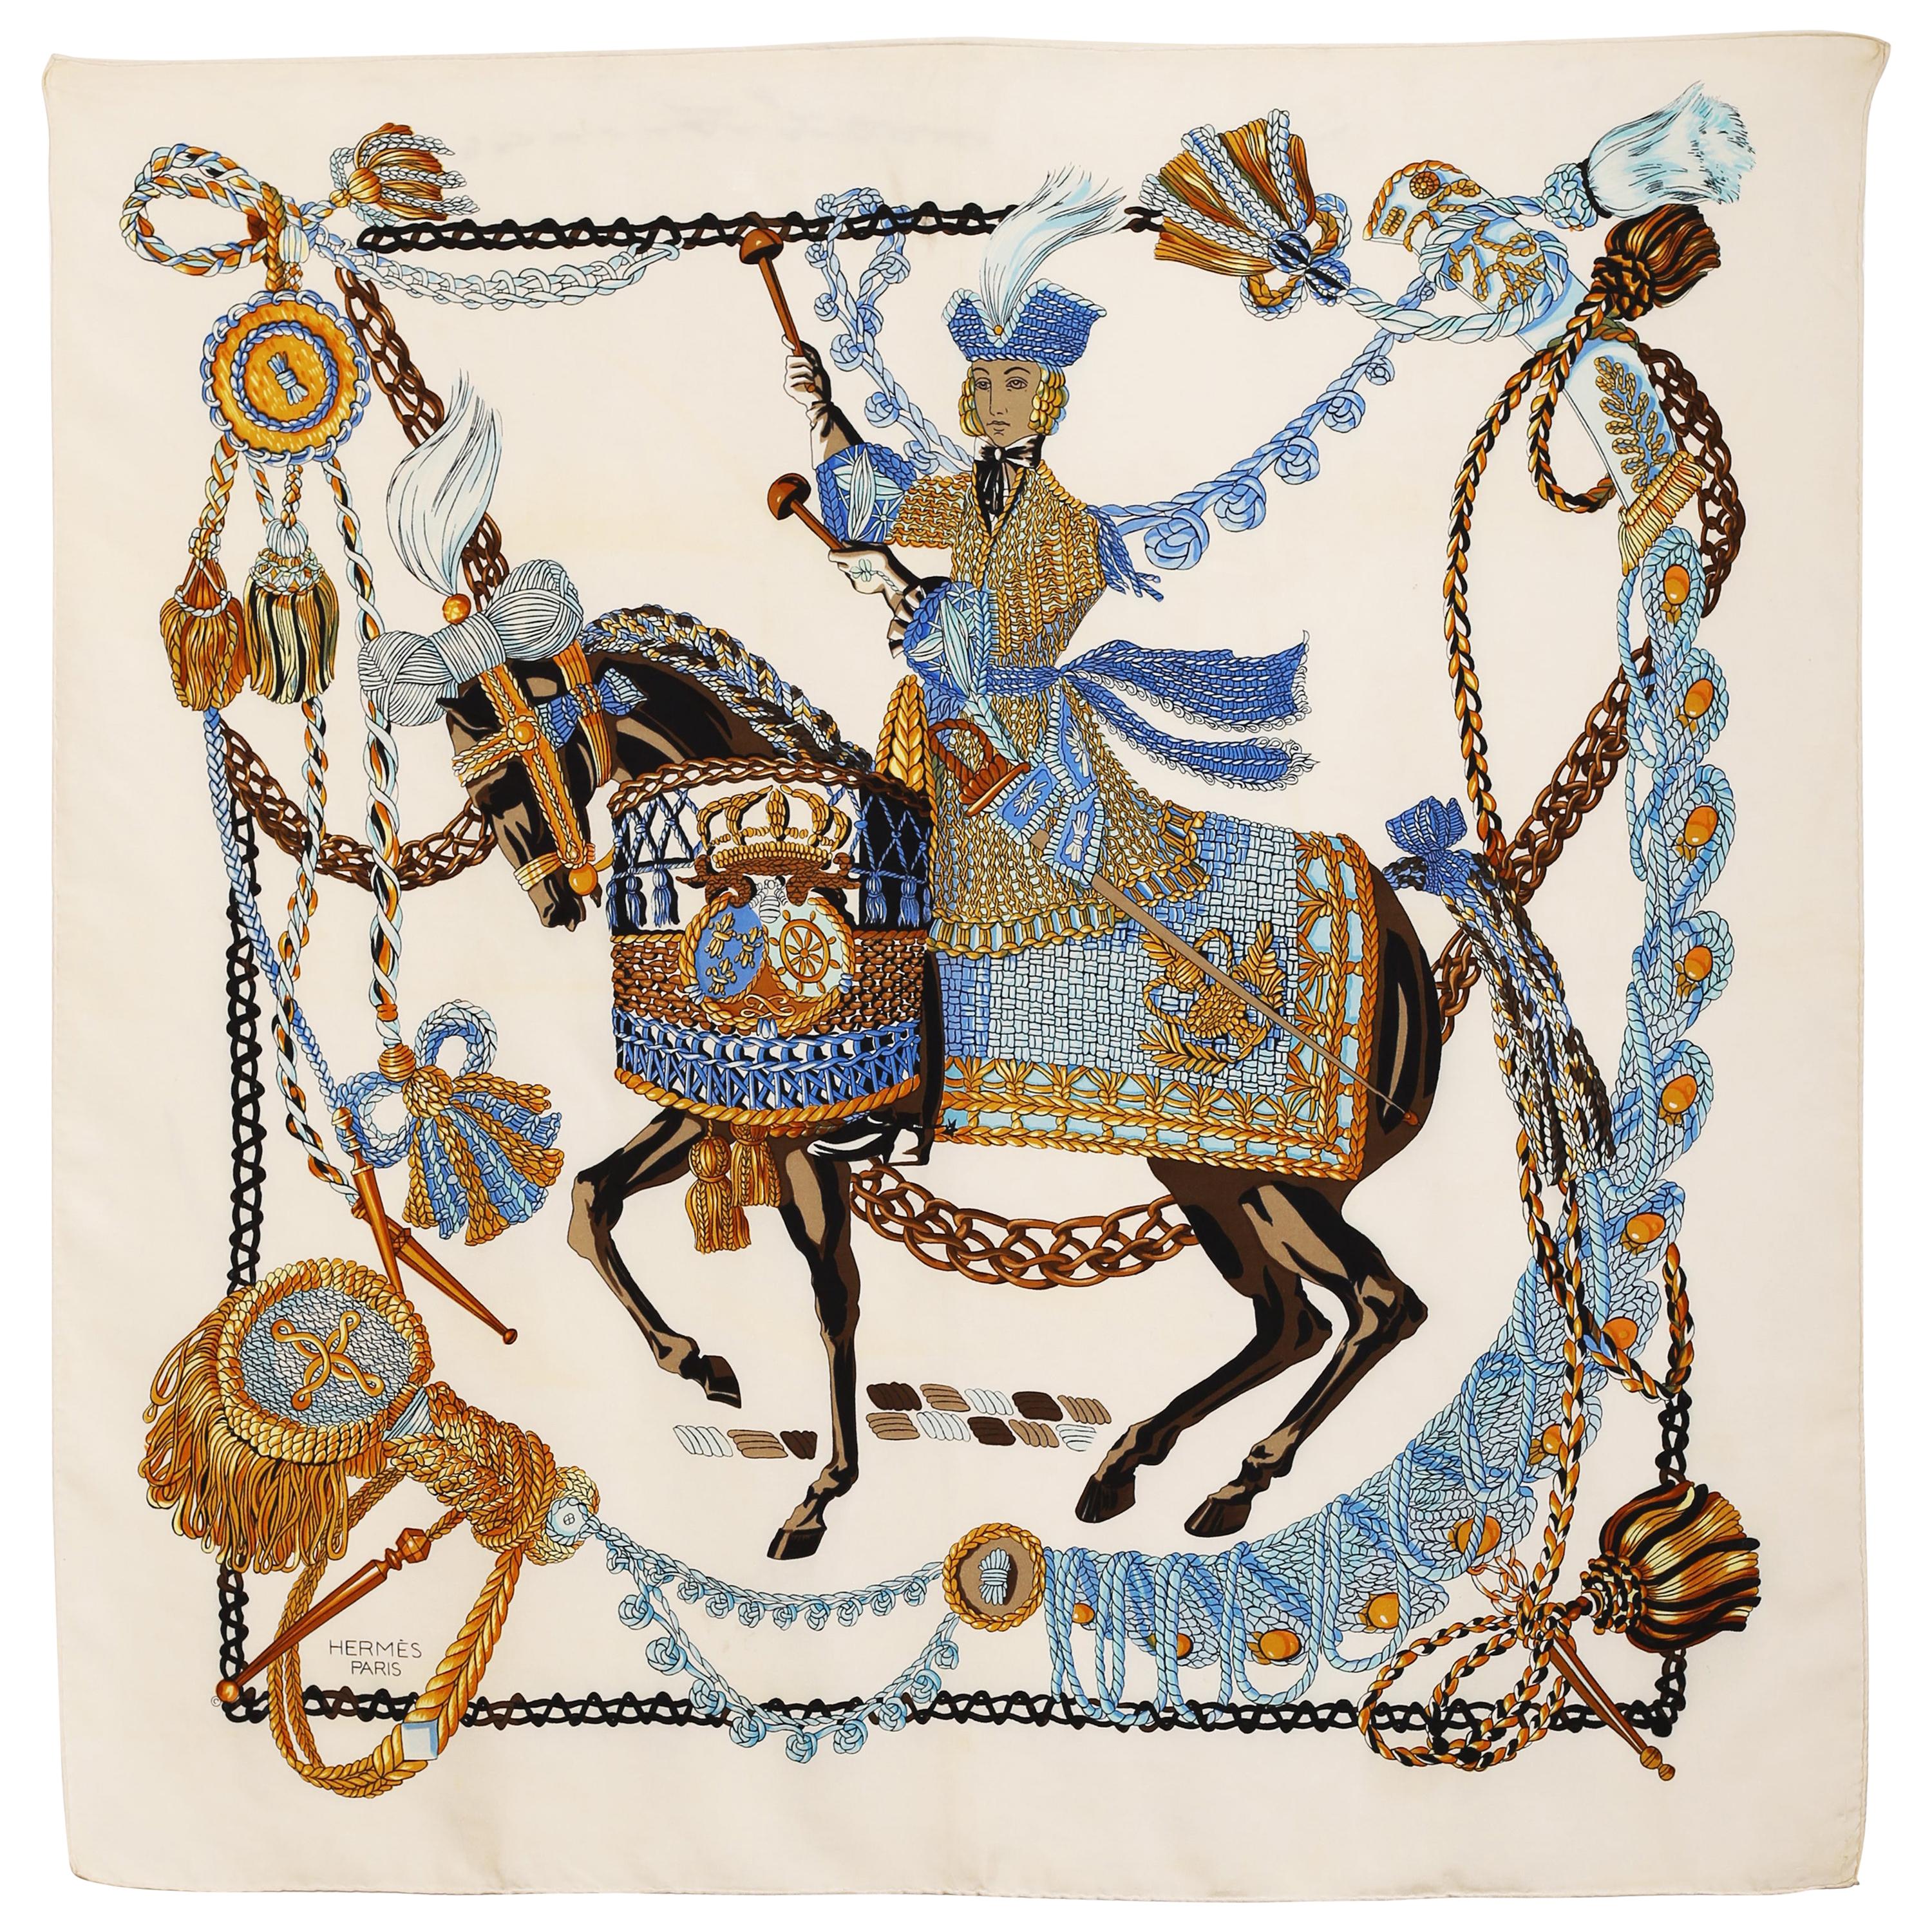 Hermes silk scarf Le Timbalier by Francoise Heron 1961